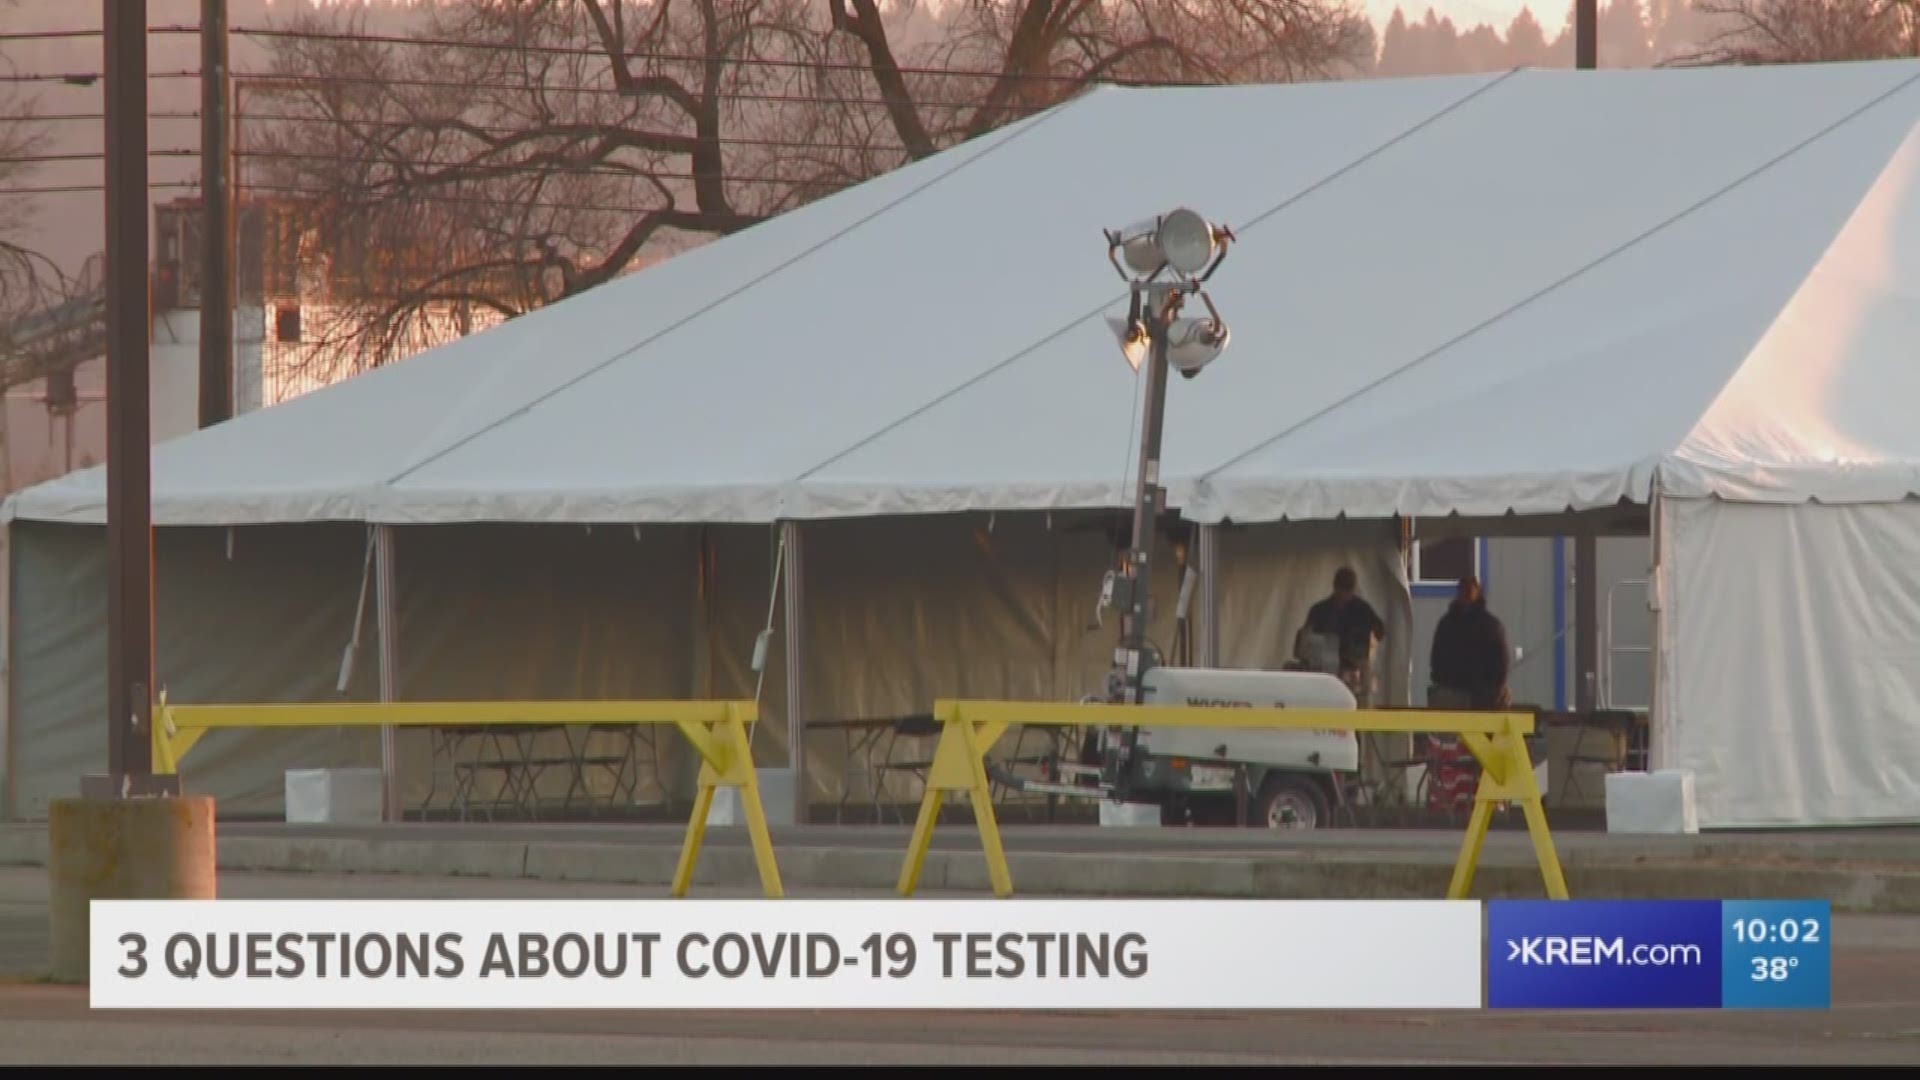 Getting fast, reliable testing has been a challenge nationwide and in Spokane.